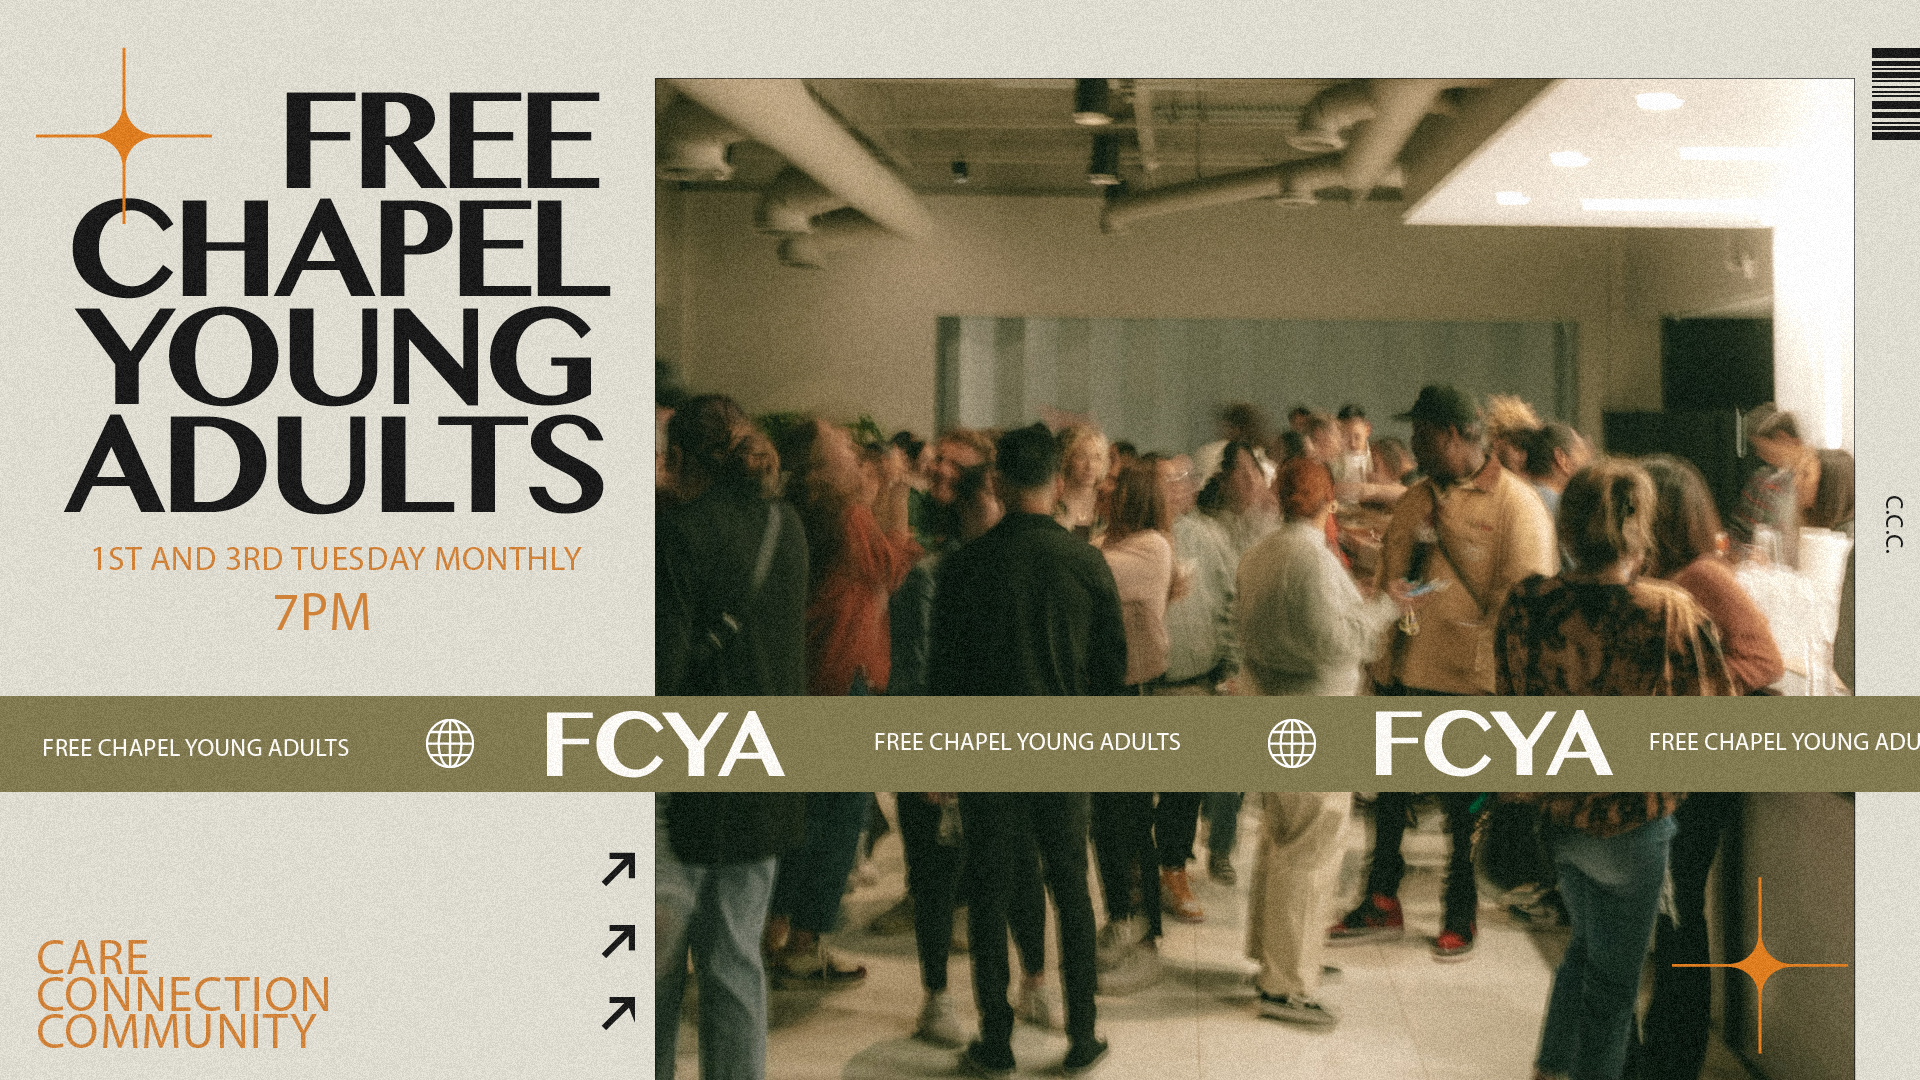 FCYA: First & Third Tuesday at the Braselton campus